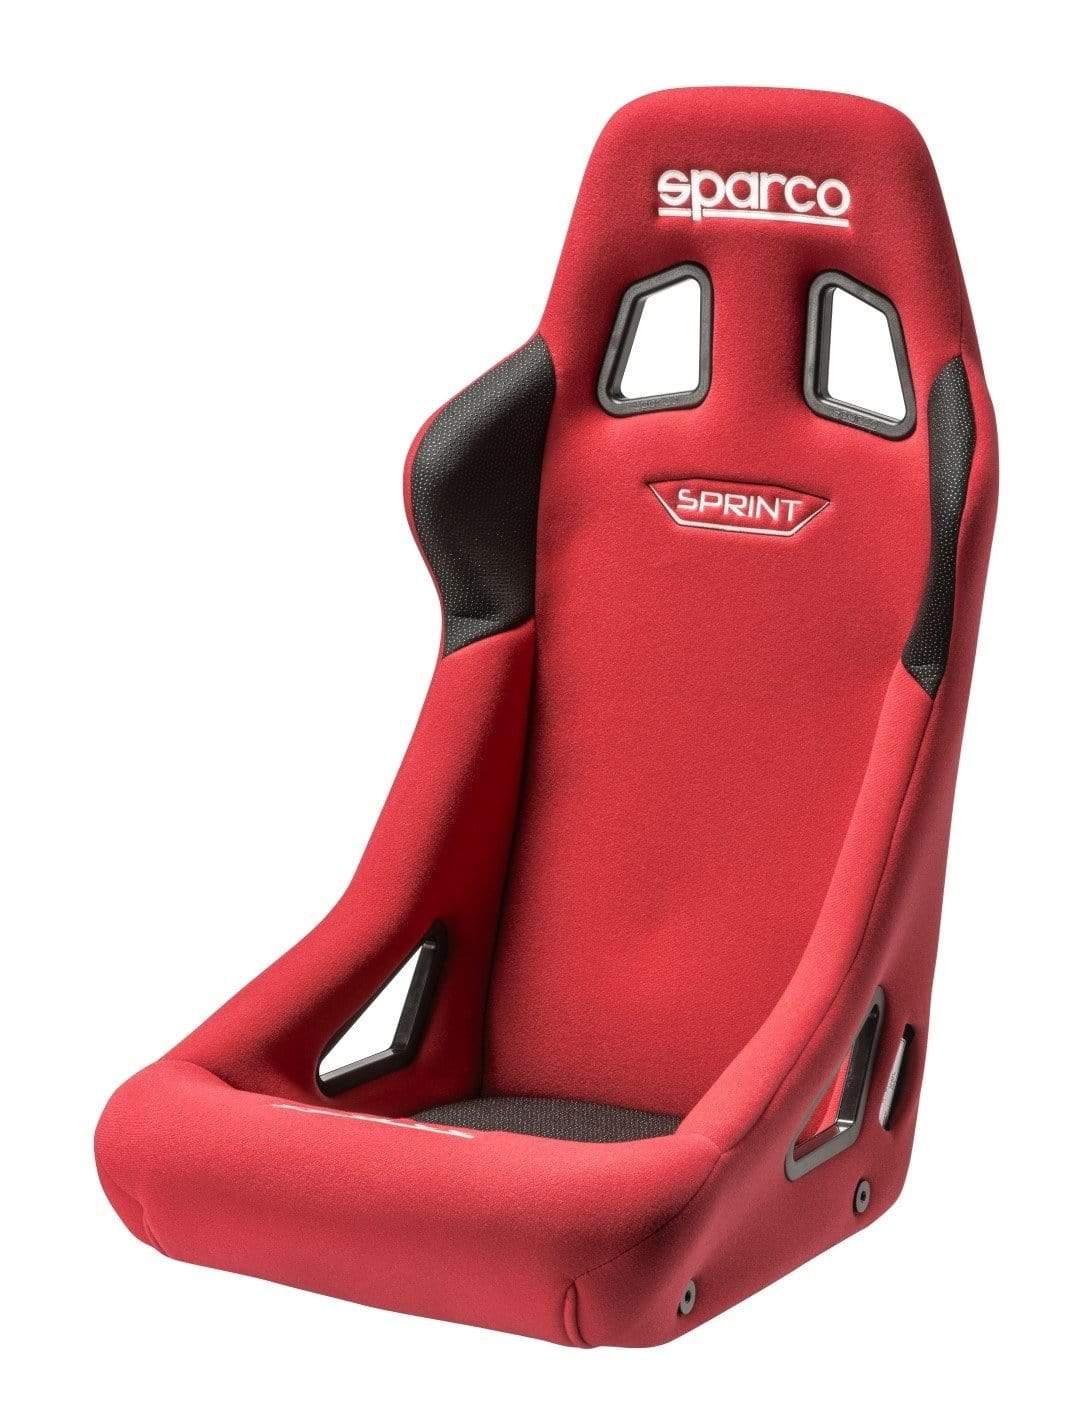 Sparco Seat Sprint (Medium) Red - Universal - Dirty Racing Products